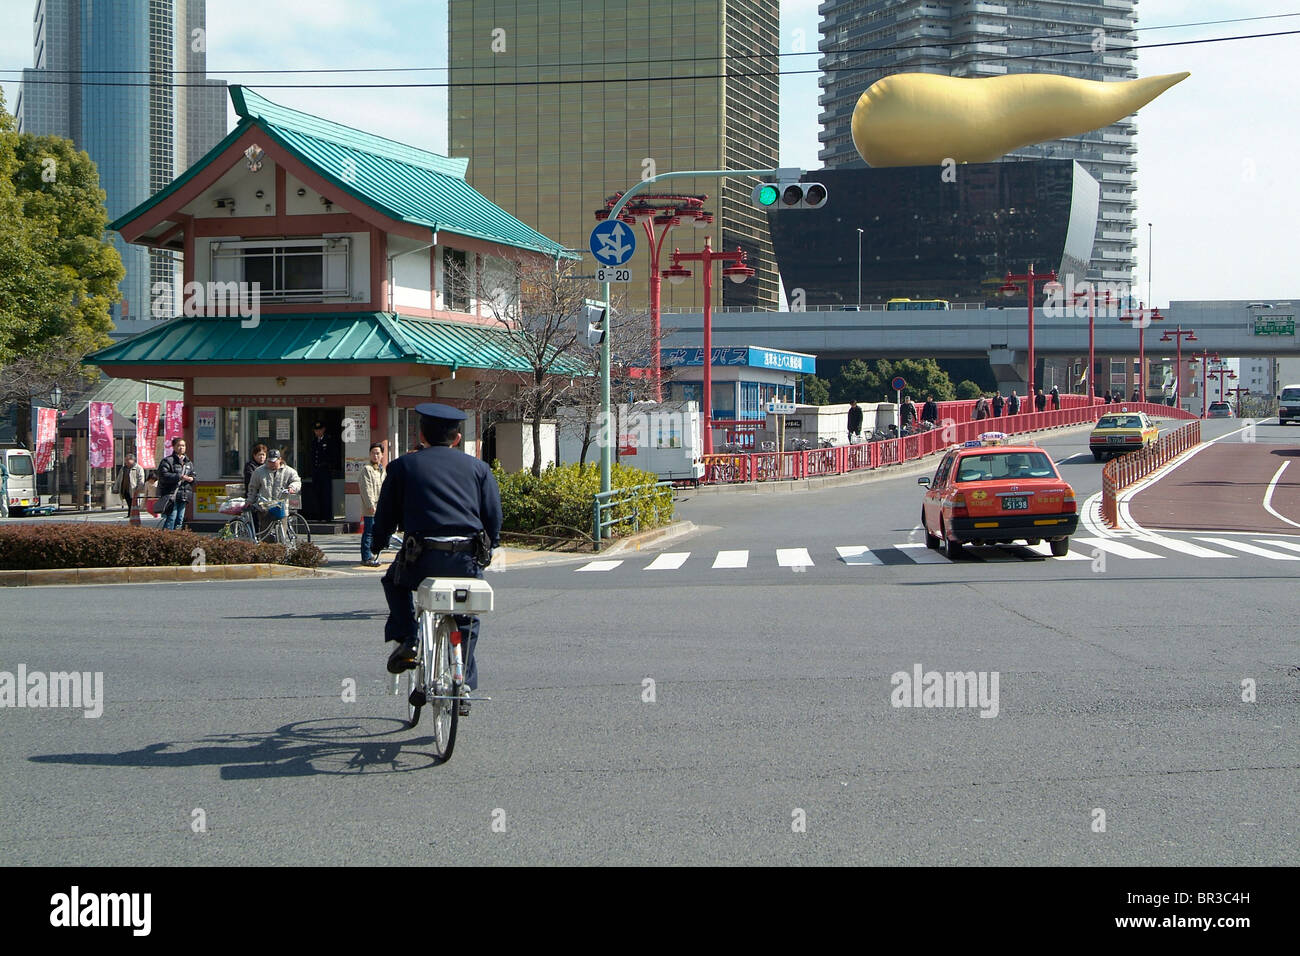 Japanese policeman on bicycle, Asahi Beer Headquarters Building in background Stock Photo